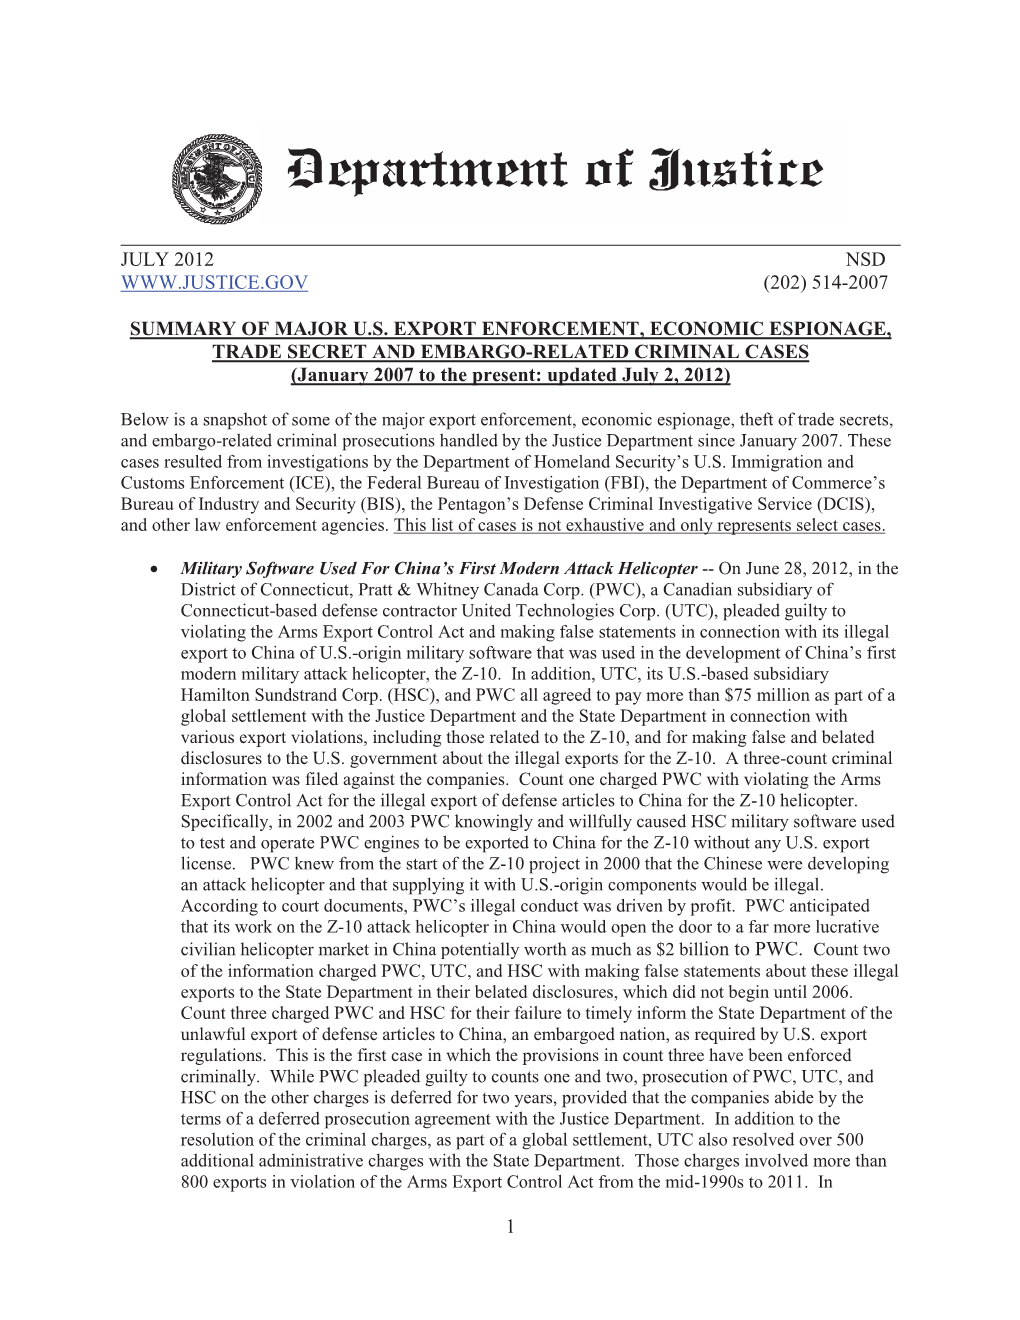 SUMMARY of MAJOR U.S. EXPORT ENFORCEMENT, ECONOMIC ESPIONAGE, TRADE SECRET and EMBARGO-RELATED CRIMINAL CASES (January 2007 to the Present: Updated July 2, 2012)